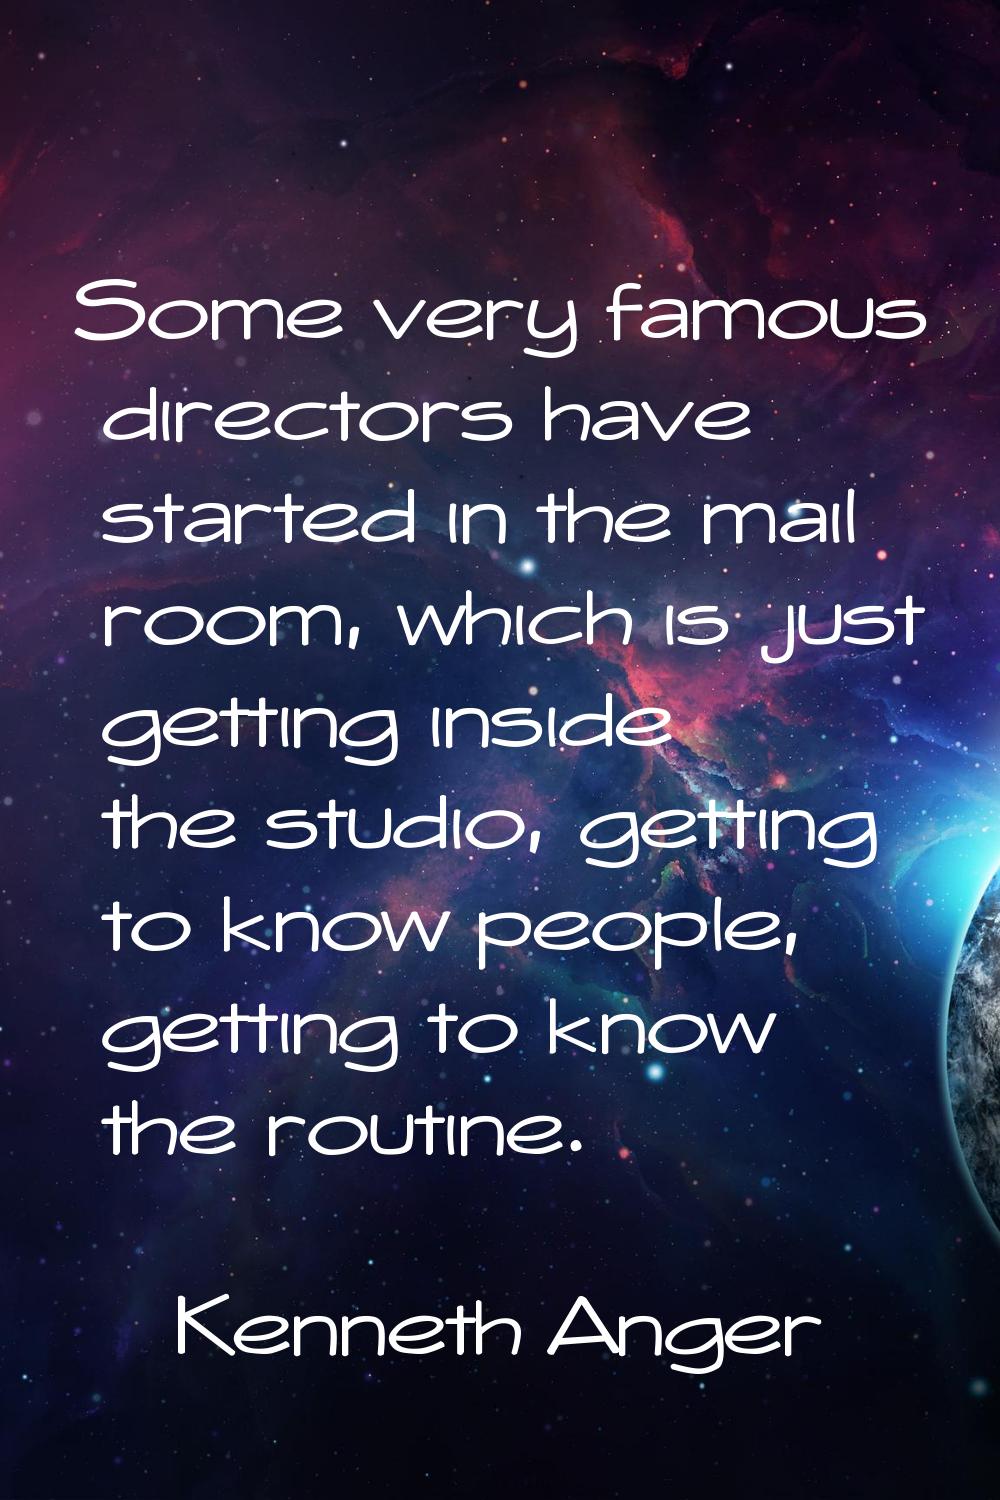 Some very famous directors have started in the mail room, which is just getting inside the studio, 